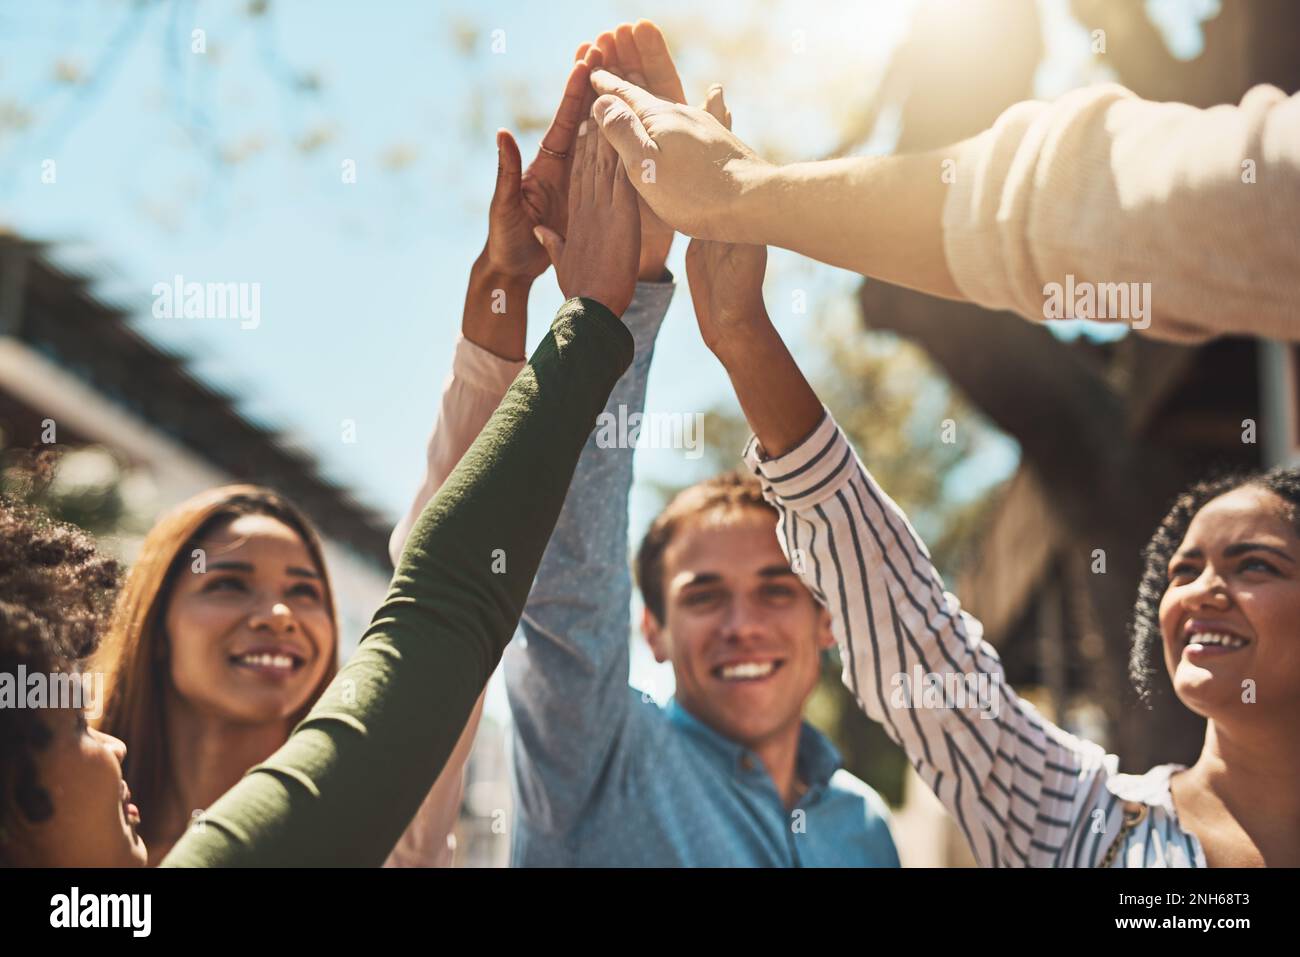 Heres to a awesome day ahead of us. a group of cheerful young friends forming a huddle and giving each other a high five outside during the day. Stock Photo